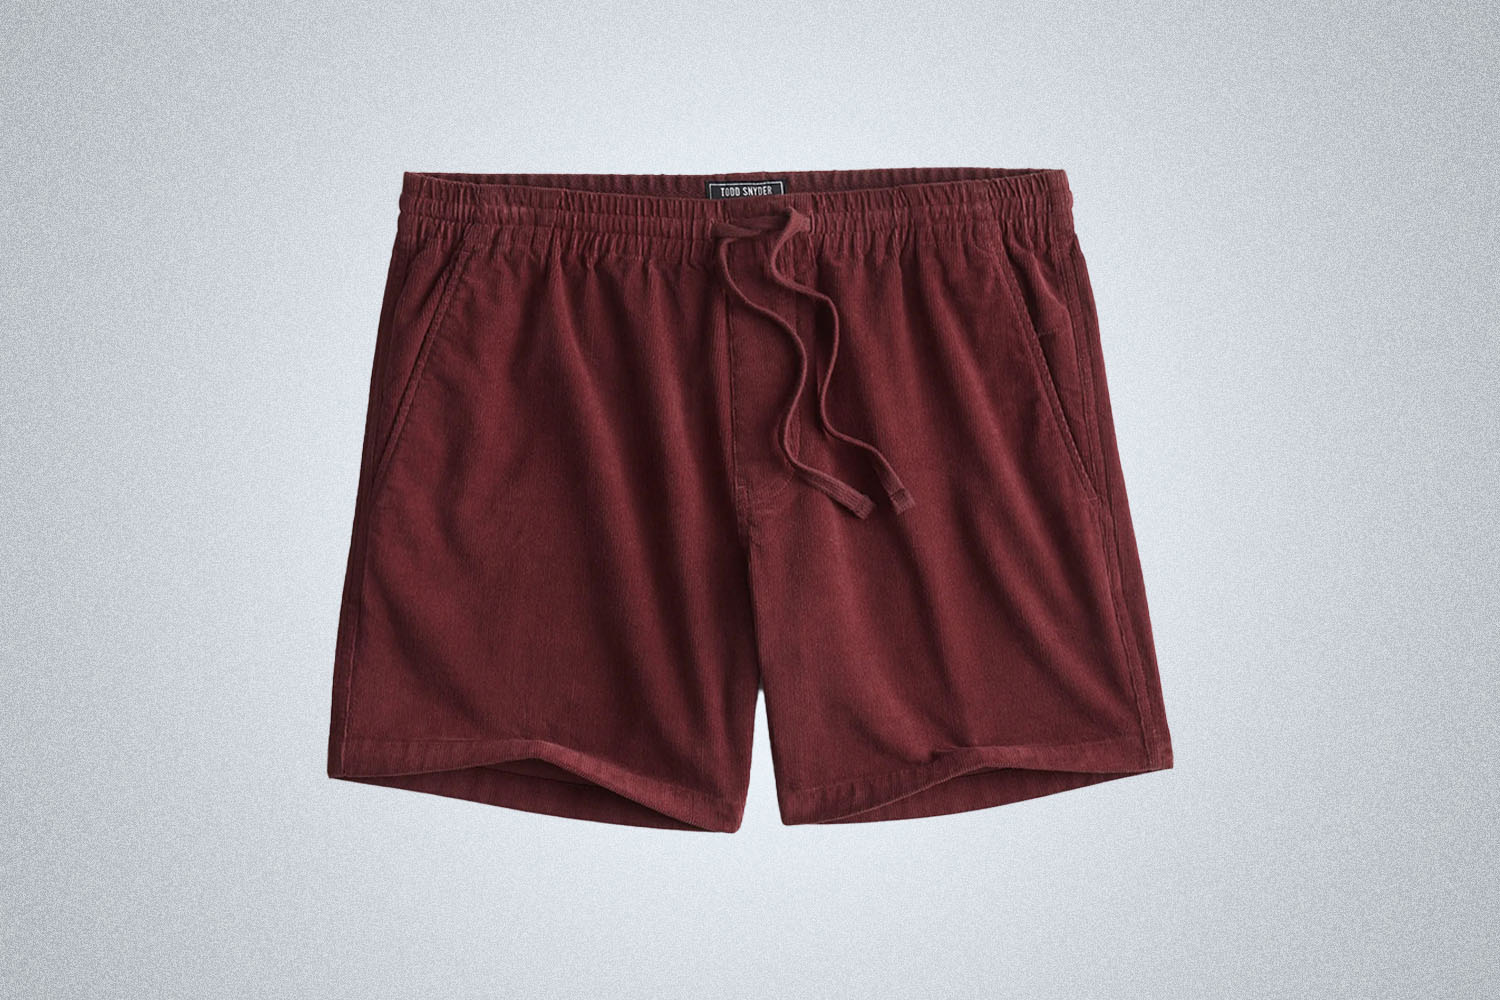 10 Great Pairs of Shorts, None of Them Over 5 Inches in Length - InsideHook